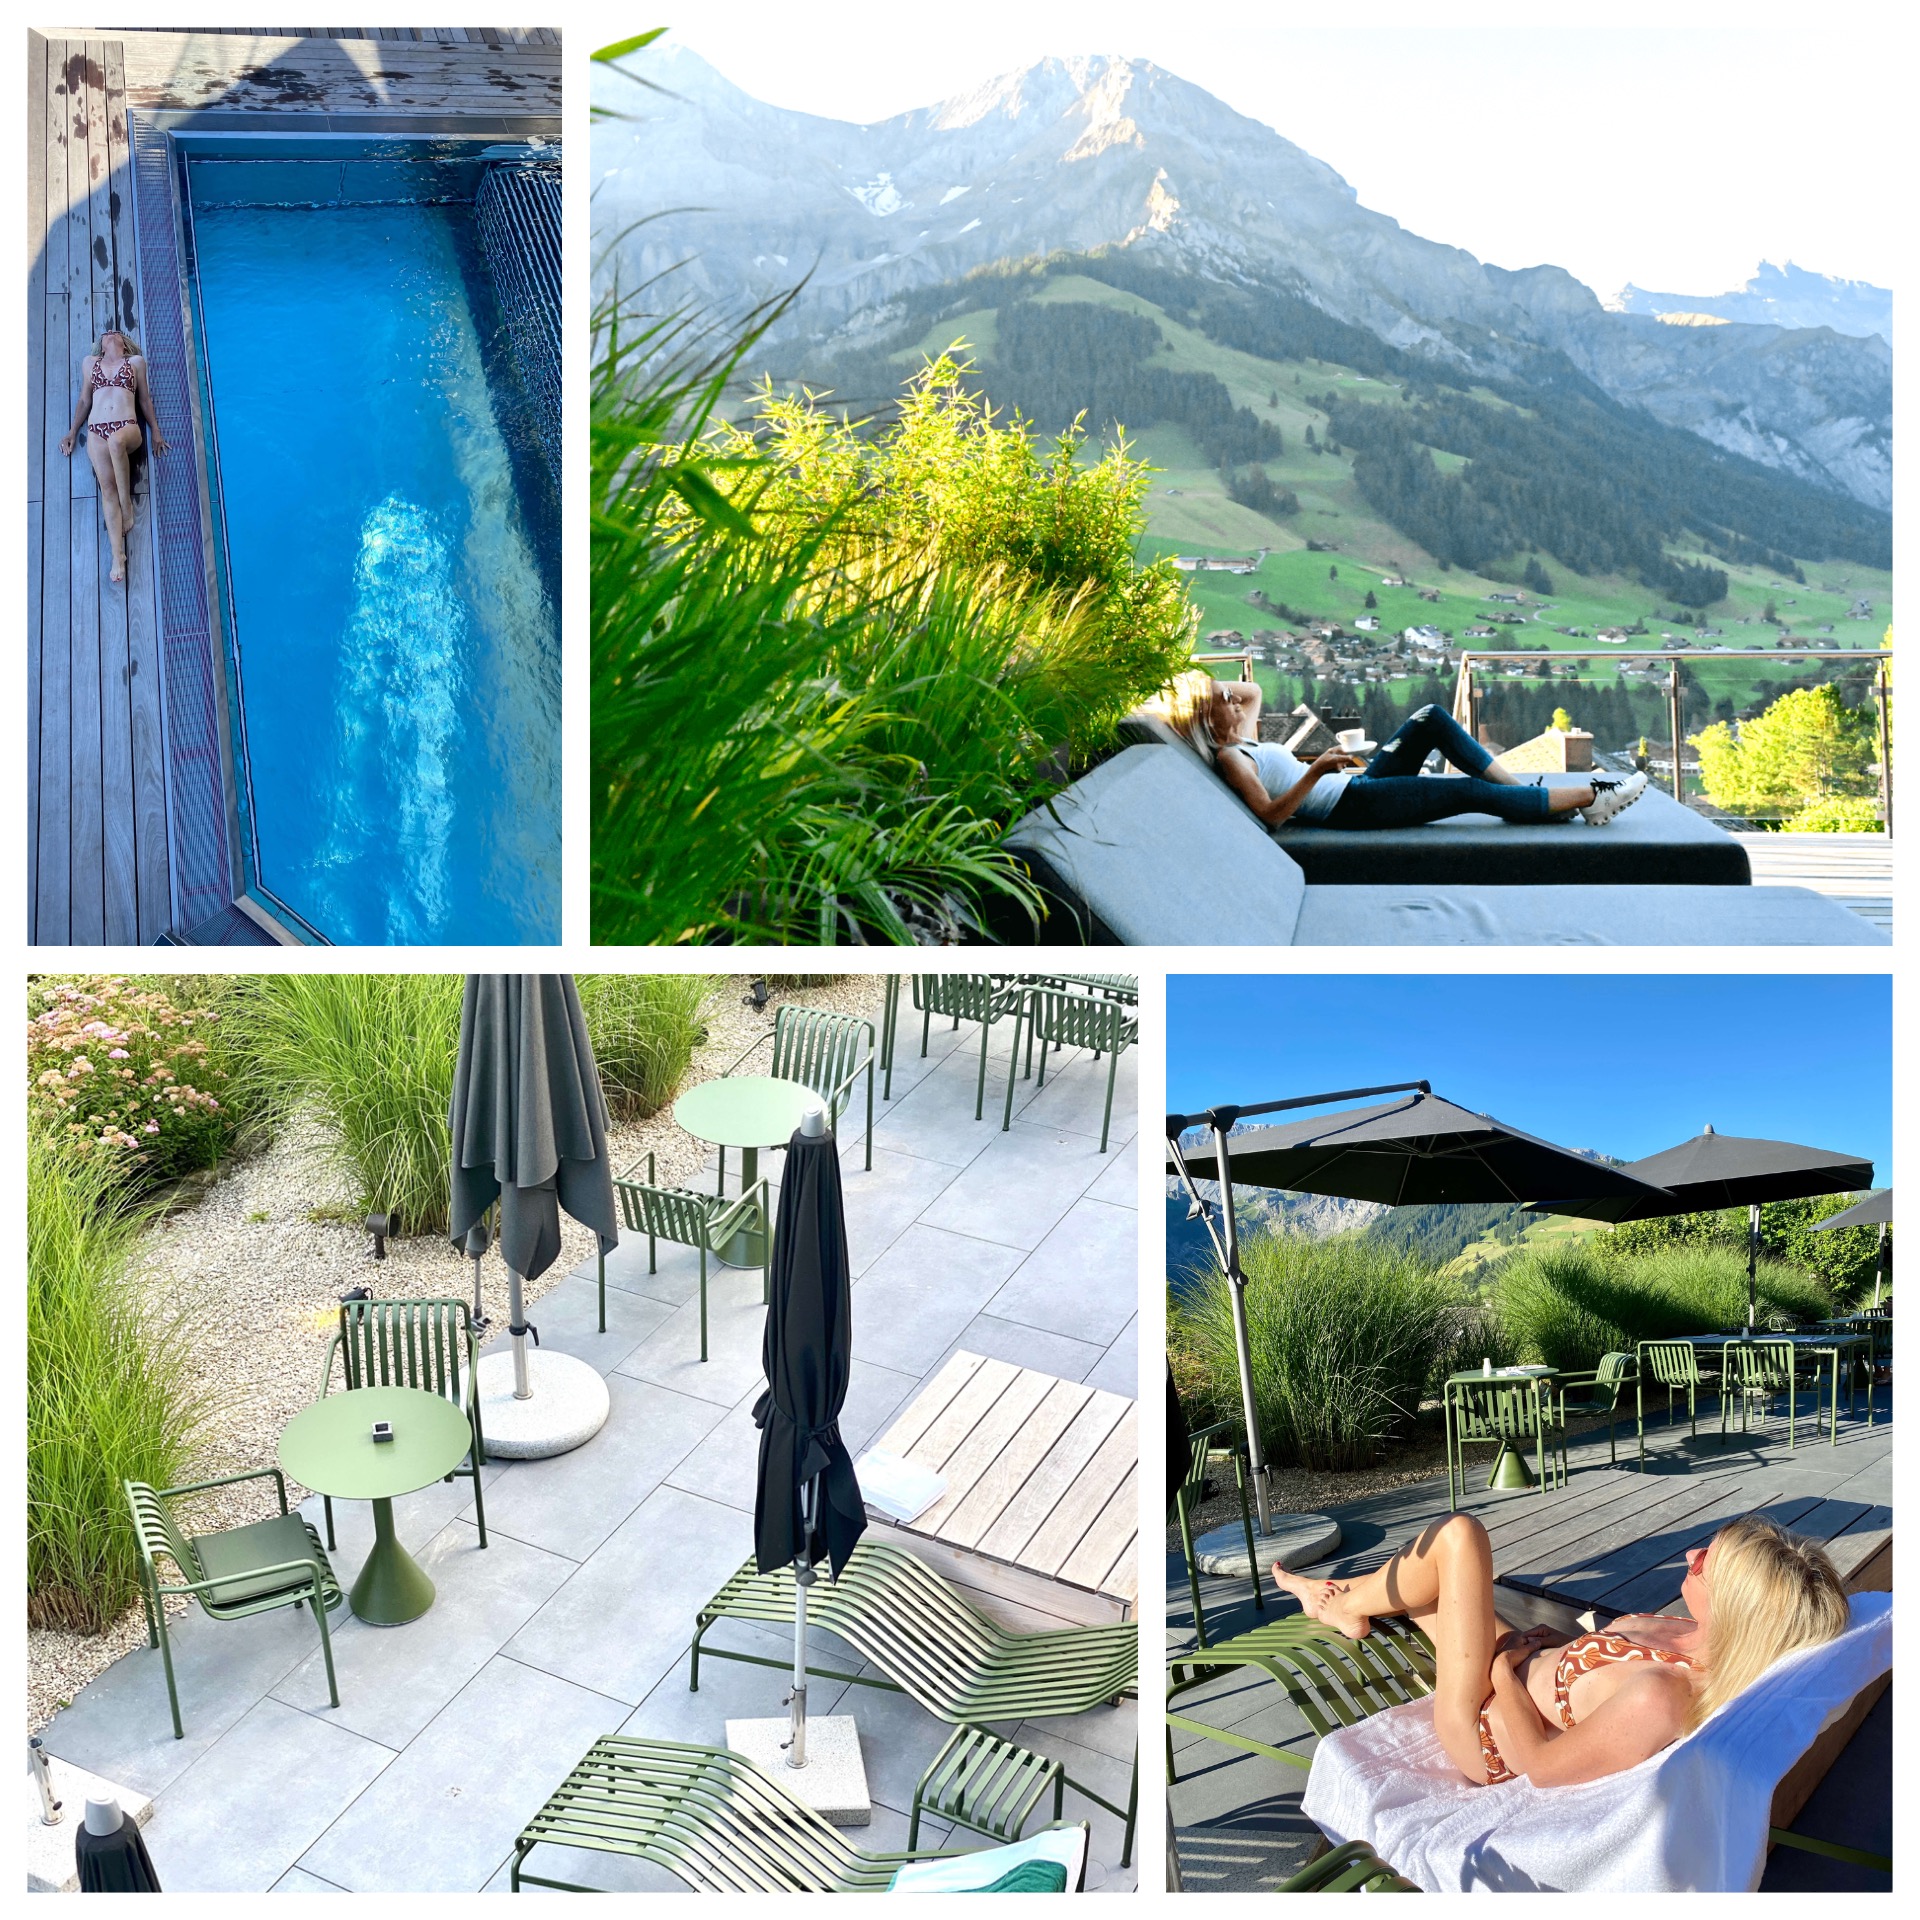 Finding Inner Peace & Adventure at The Cambrian Adelboden